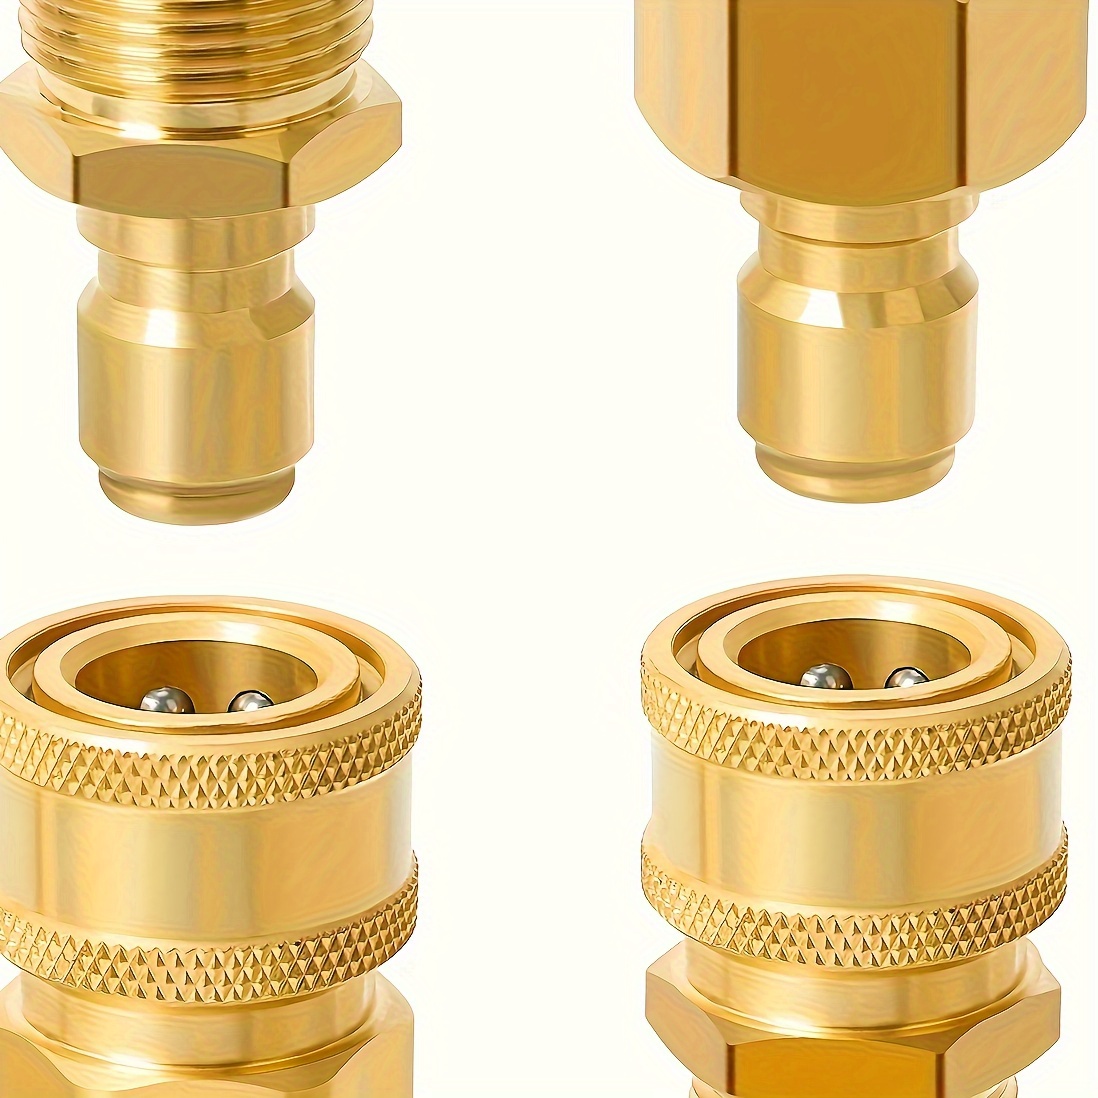 

4-piece High Pressure Washer Quick Connect Adapter Set - Solid Brass, Easy Disconnect Couplers For Home, Garden & Car Cleaning Power Washer Accessories Pressure Washer Hose Adapter